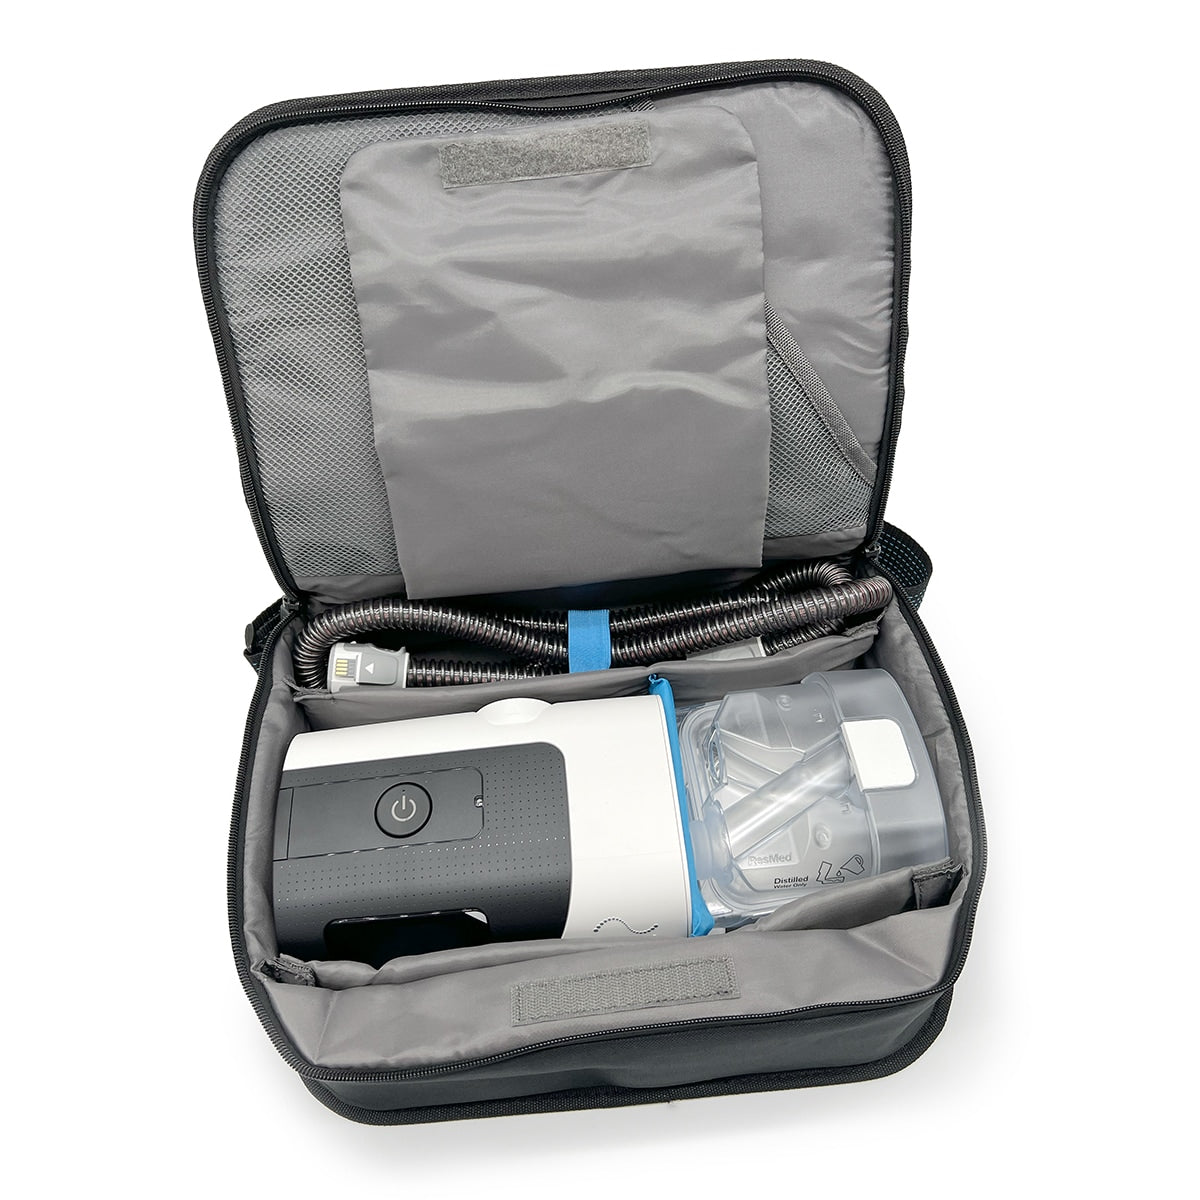 ResMed Laptop Style Travel Bag for AirSense 11 Series CPAP Machines